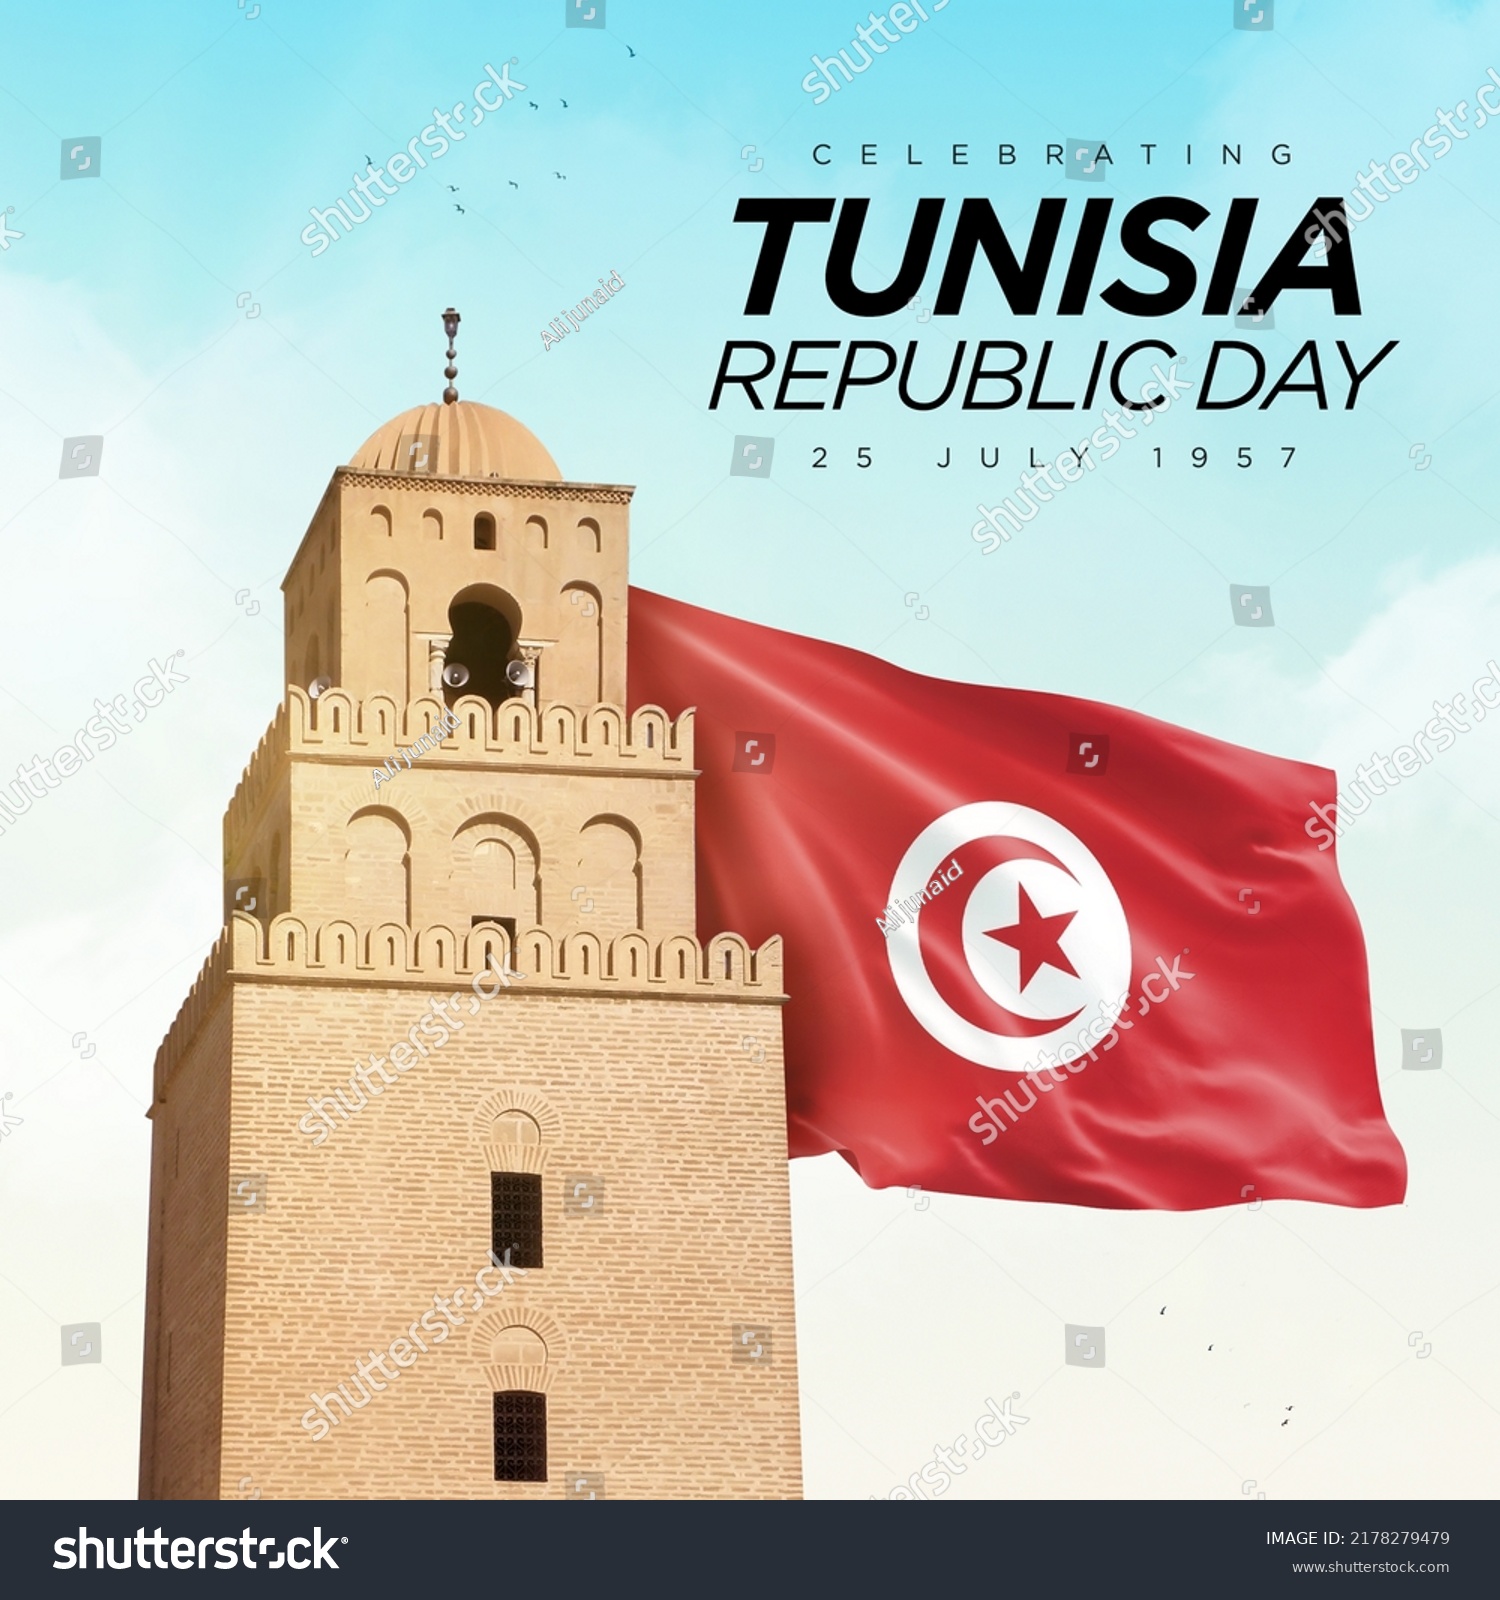 Tunisia Republic Day poster on a cloudy, grungy and blurred background. 25 July #2178279479